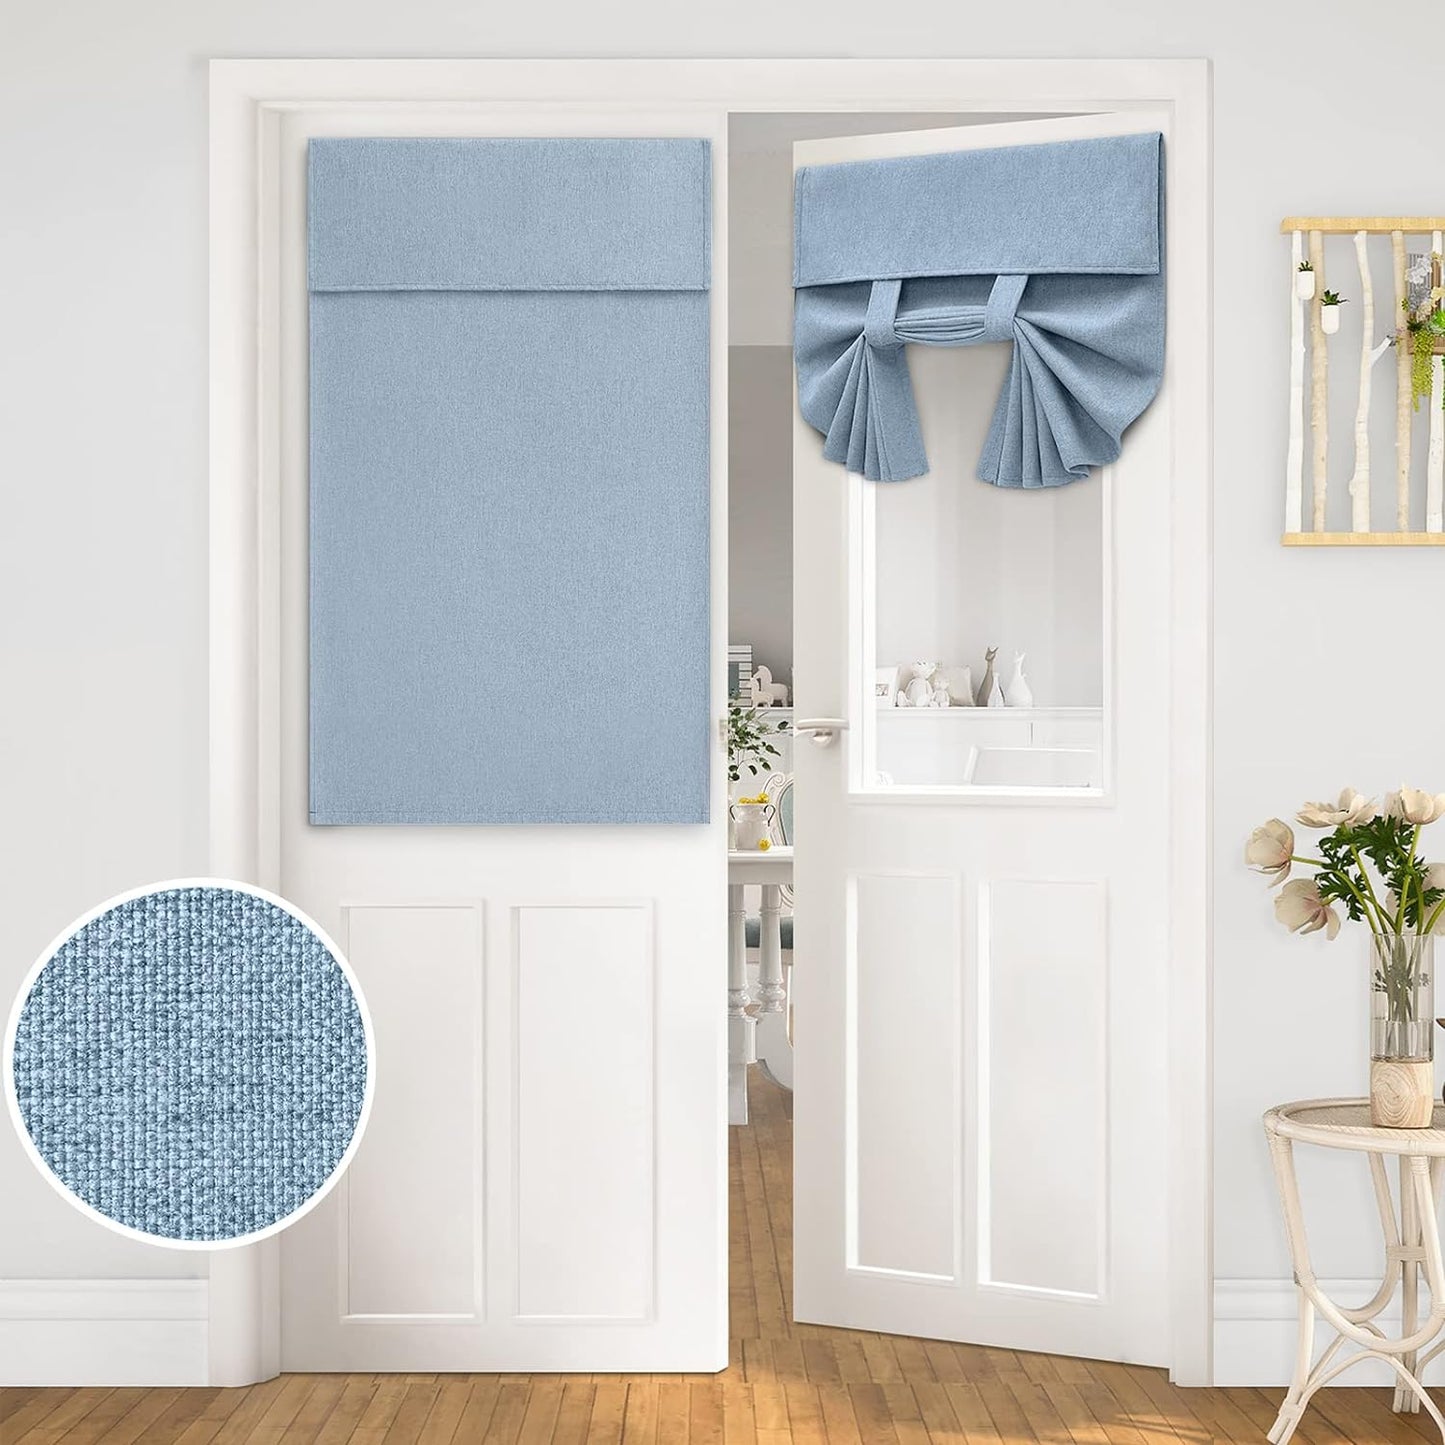 HOMEIDEAS Natural Linen French Door Curtains, Privacy Door Window Curtains Panel, French Door Shade for Door Window, Thermal Insulated Door Window Covering for Bedroom, W26 X L40 Inch, 1 Panel  HOMEIDEAS Light Blue 1 Panel-W26" X L40" 